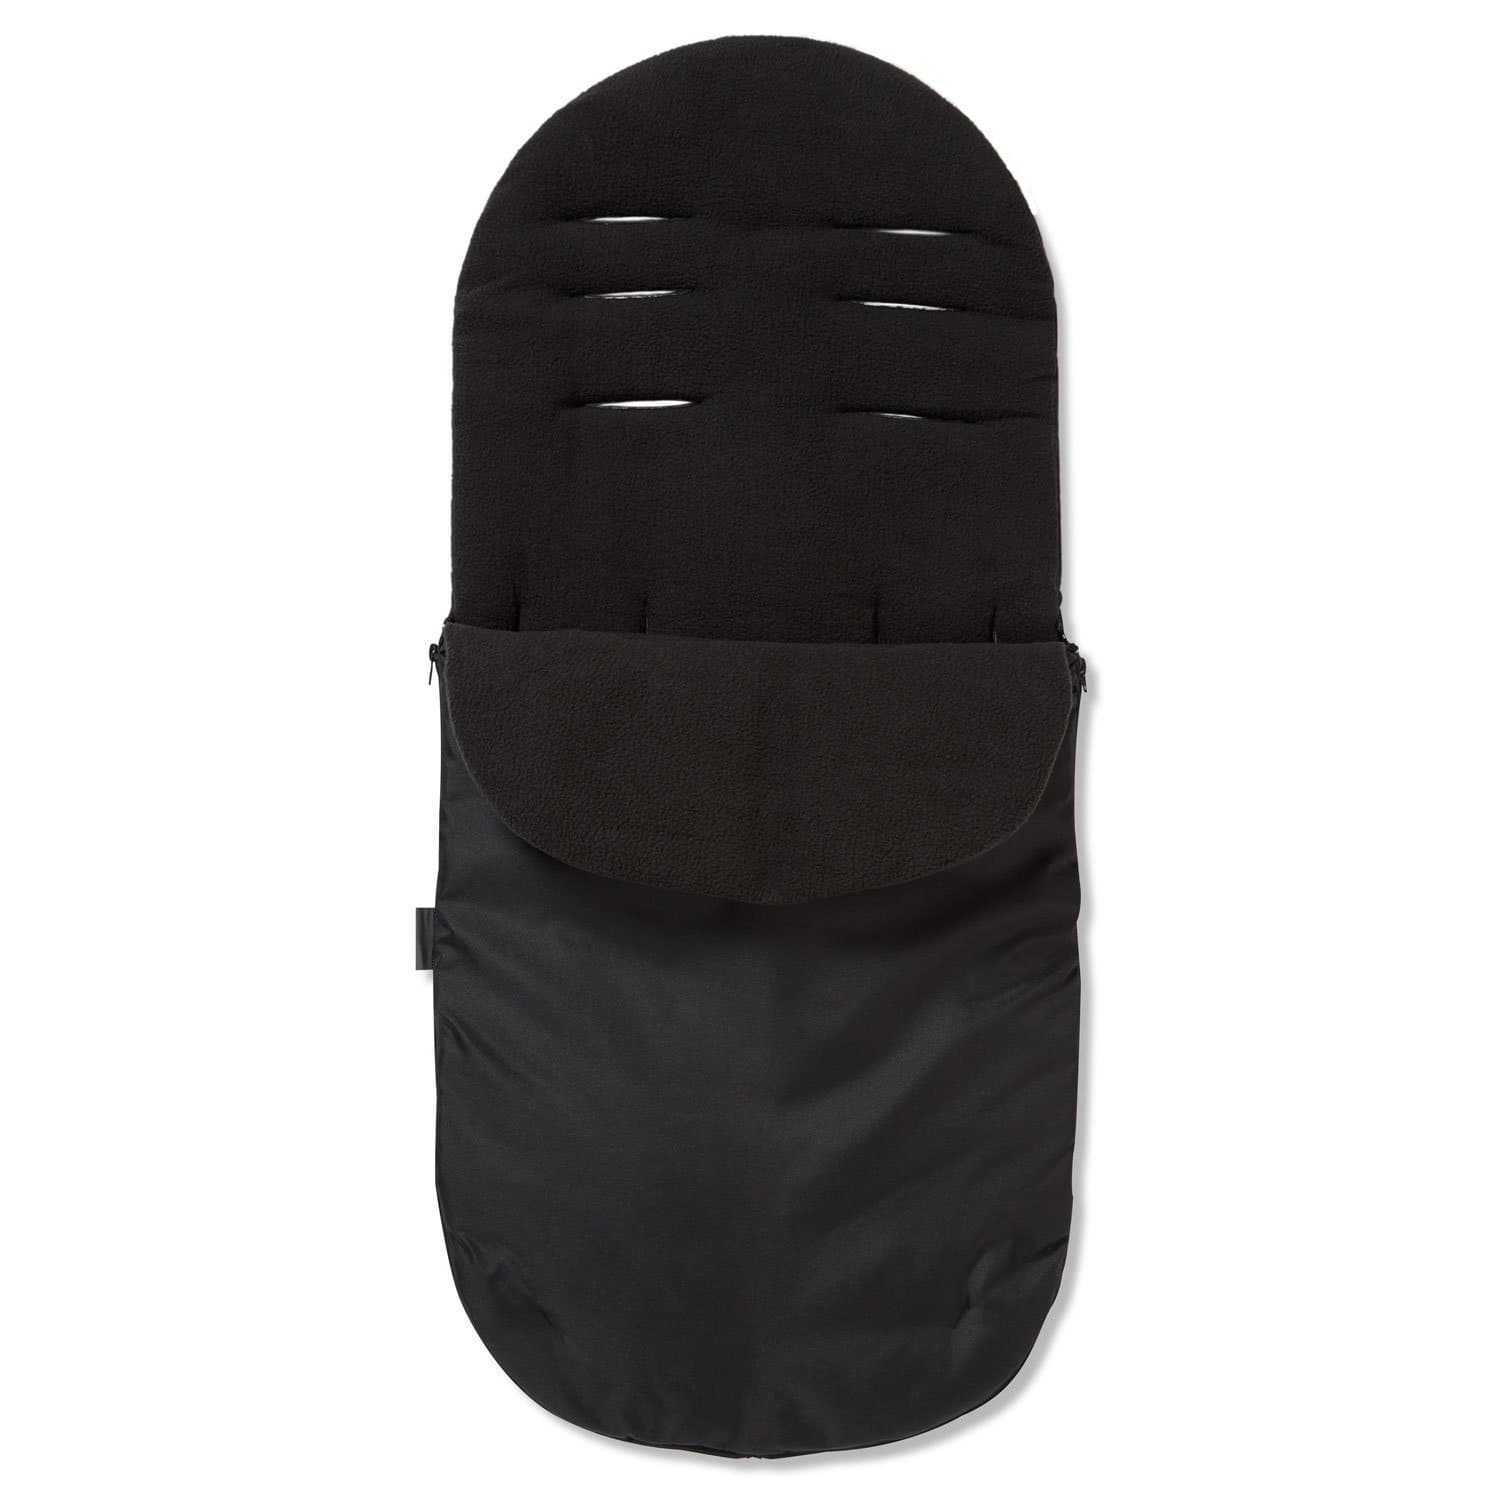 Footmuff / Cosy Toes Compatible with Kiddicouture - Black / Fits All Models | For Your Little One